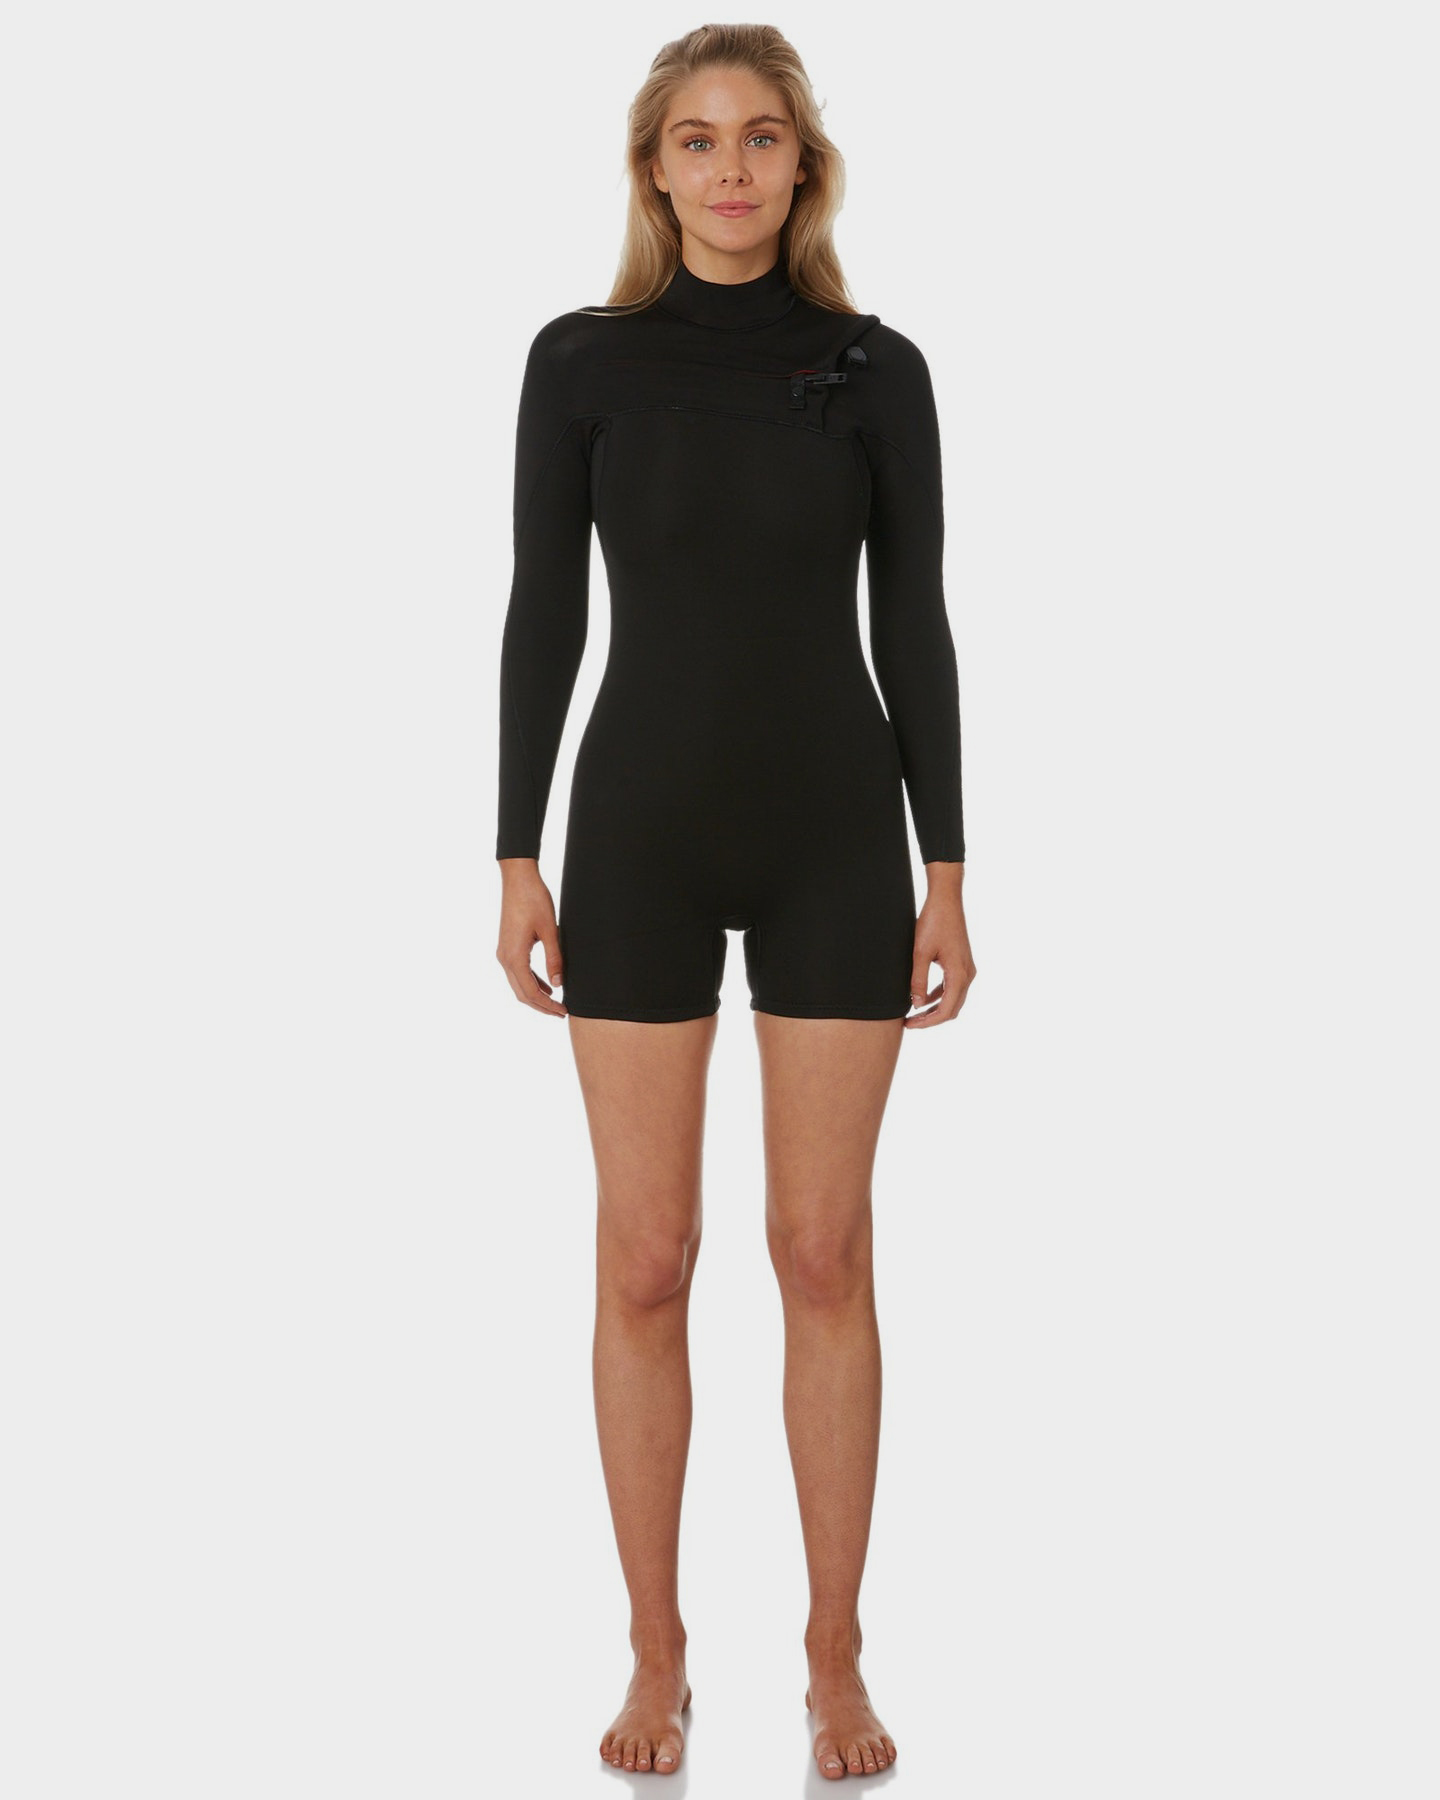 Buy Womens L/S High Performance Spring Suit & Pay Later | humm